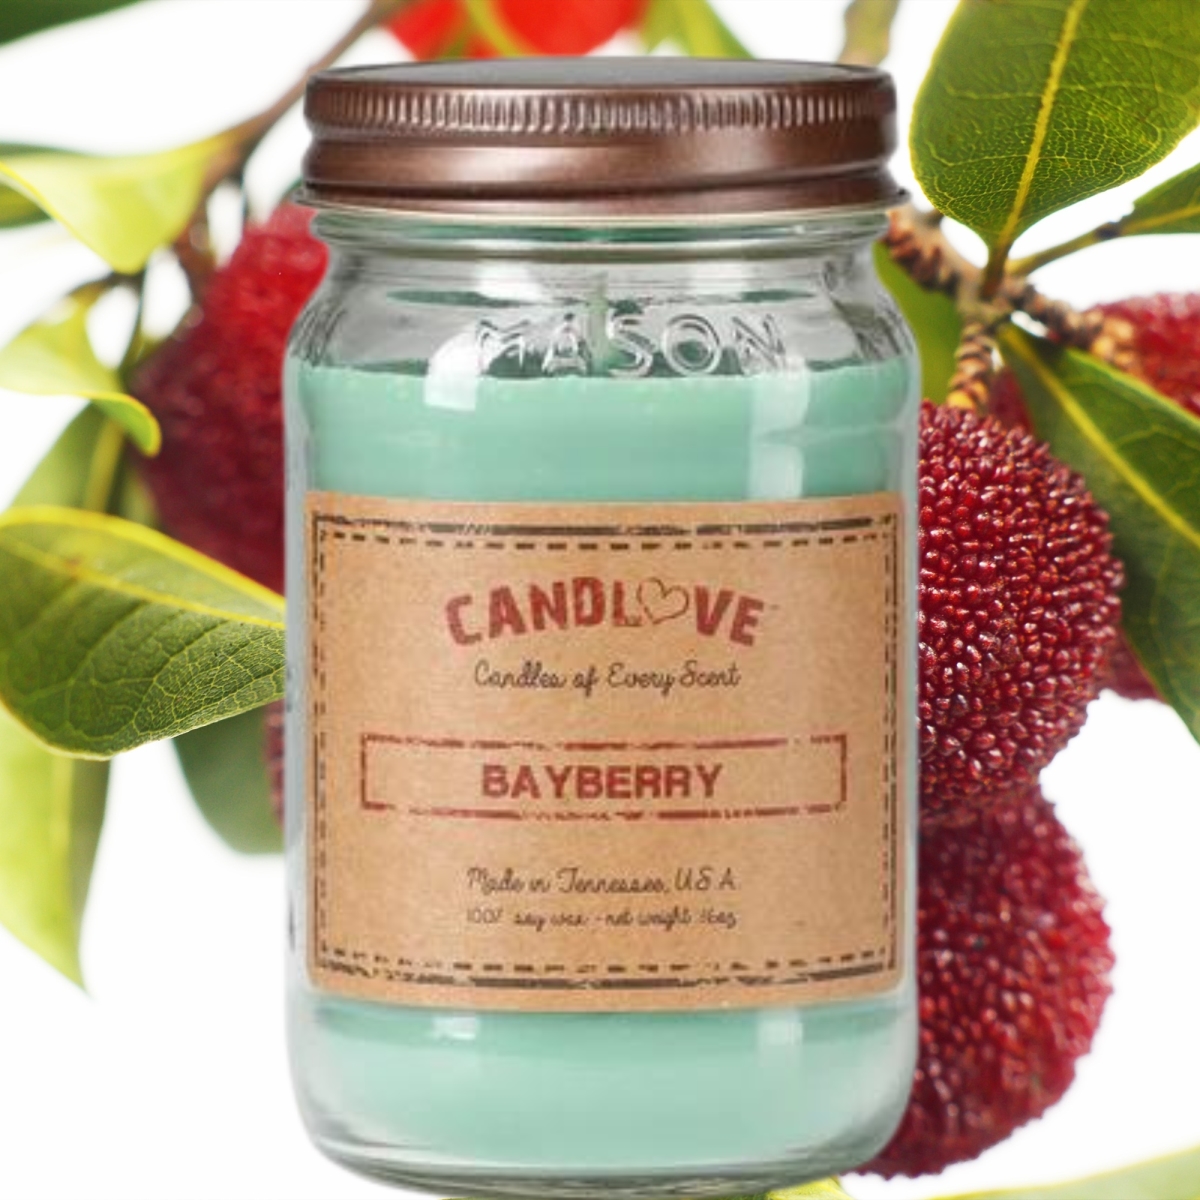 Picture of PPI SUPPLIES Bayberry-C Candlove Bayberry Scented Candle - Non-Toxic 100% Soy Candle - Handmade & Hand Poured Long Burning Candle - Highly Scented All Natural Clean Burning Candle (16 OZ Mason Jar) Made in The USA